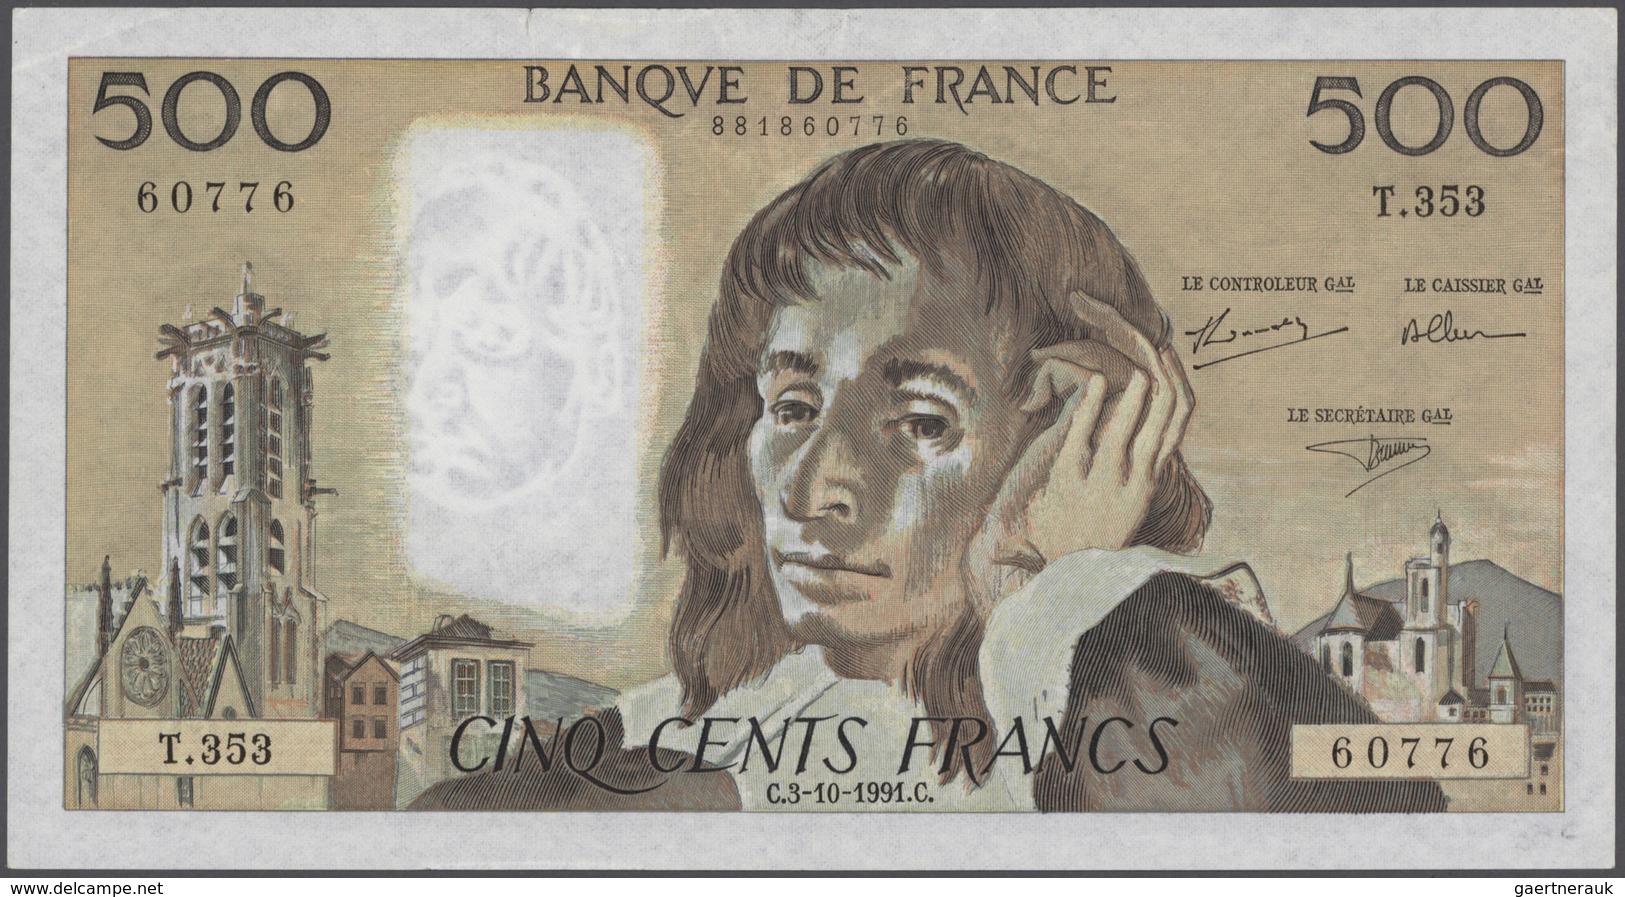 Alle Welt: Collectors album with more than 210 banknotes Great Britain Bernhard forgeries, Austria,